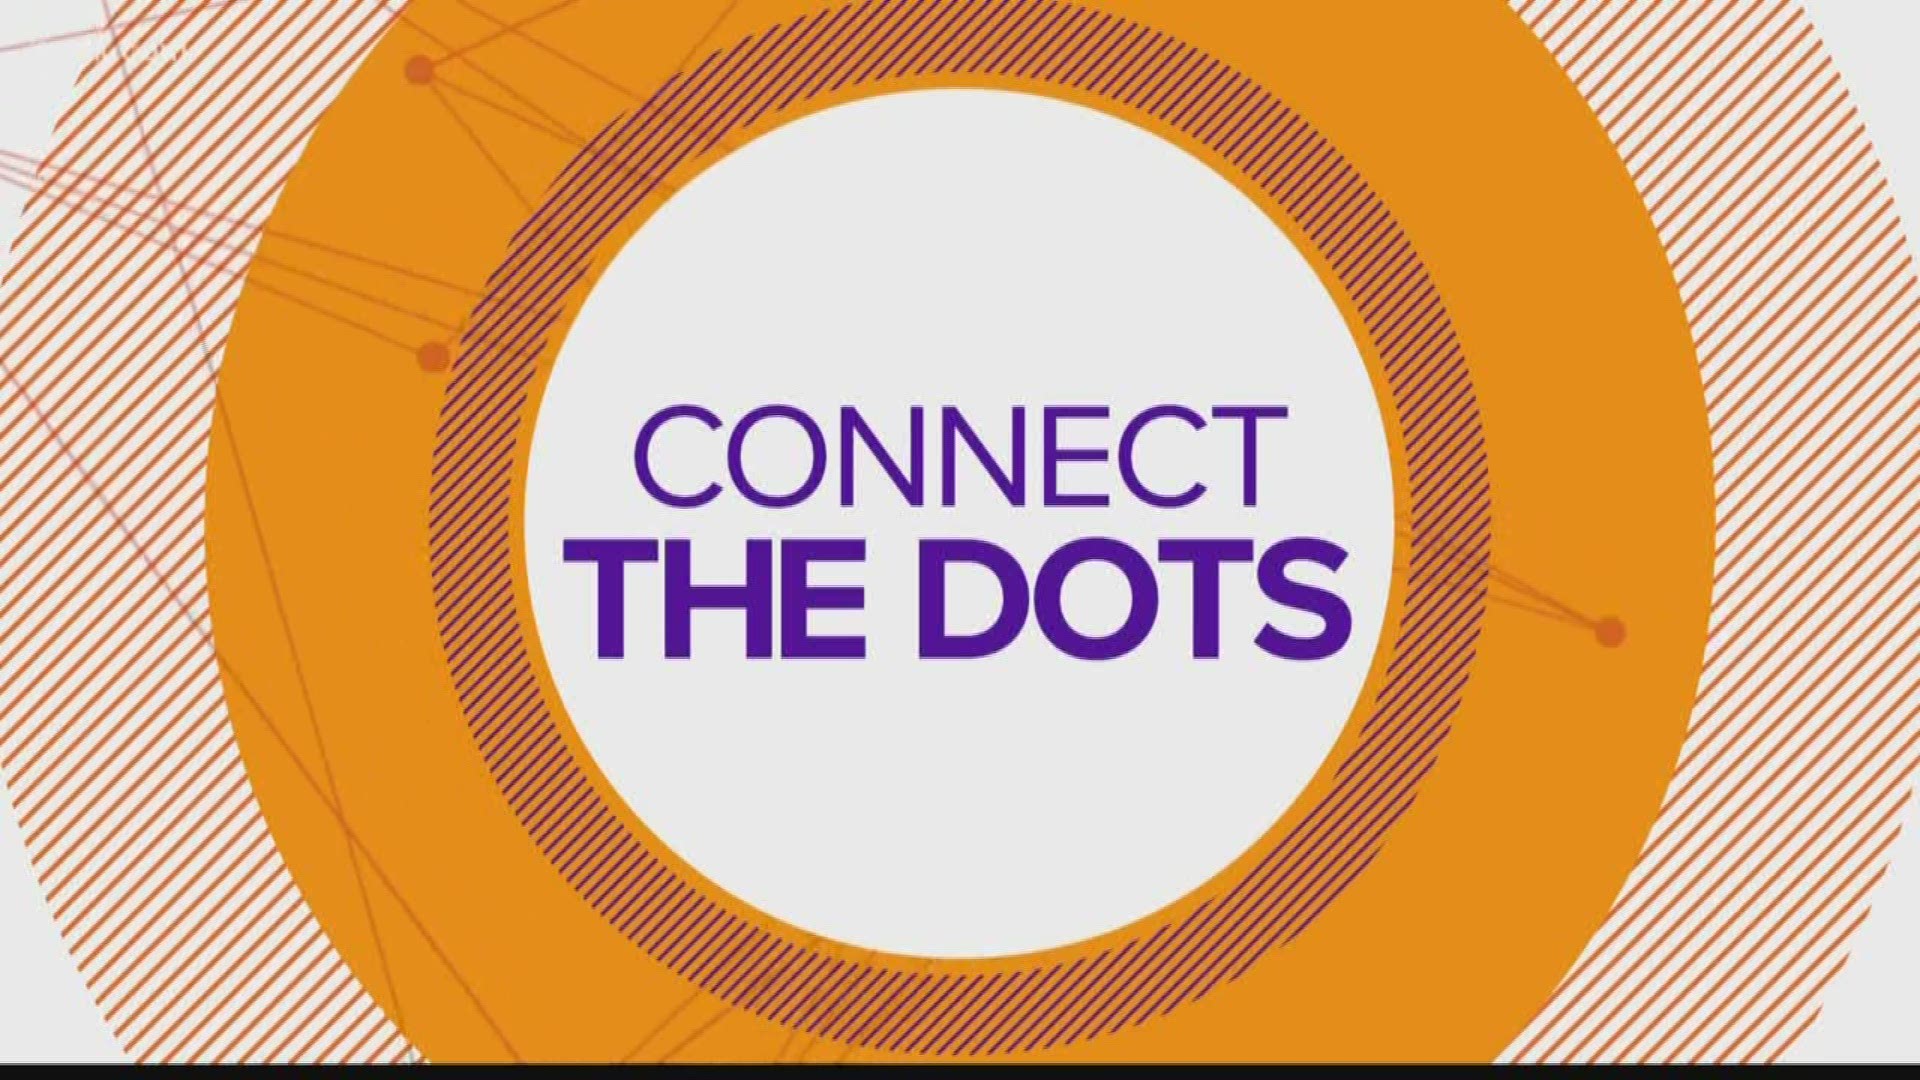 Connect the Dots: Using gift cards